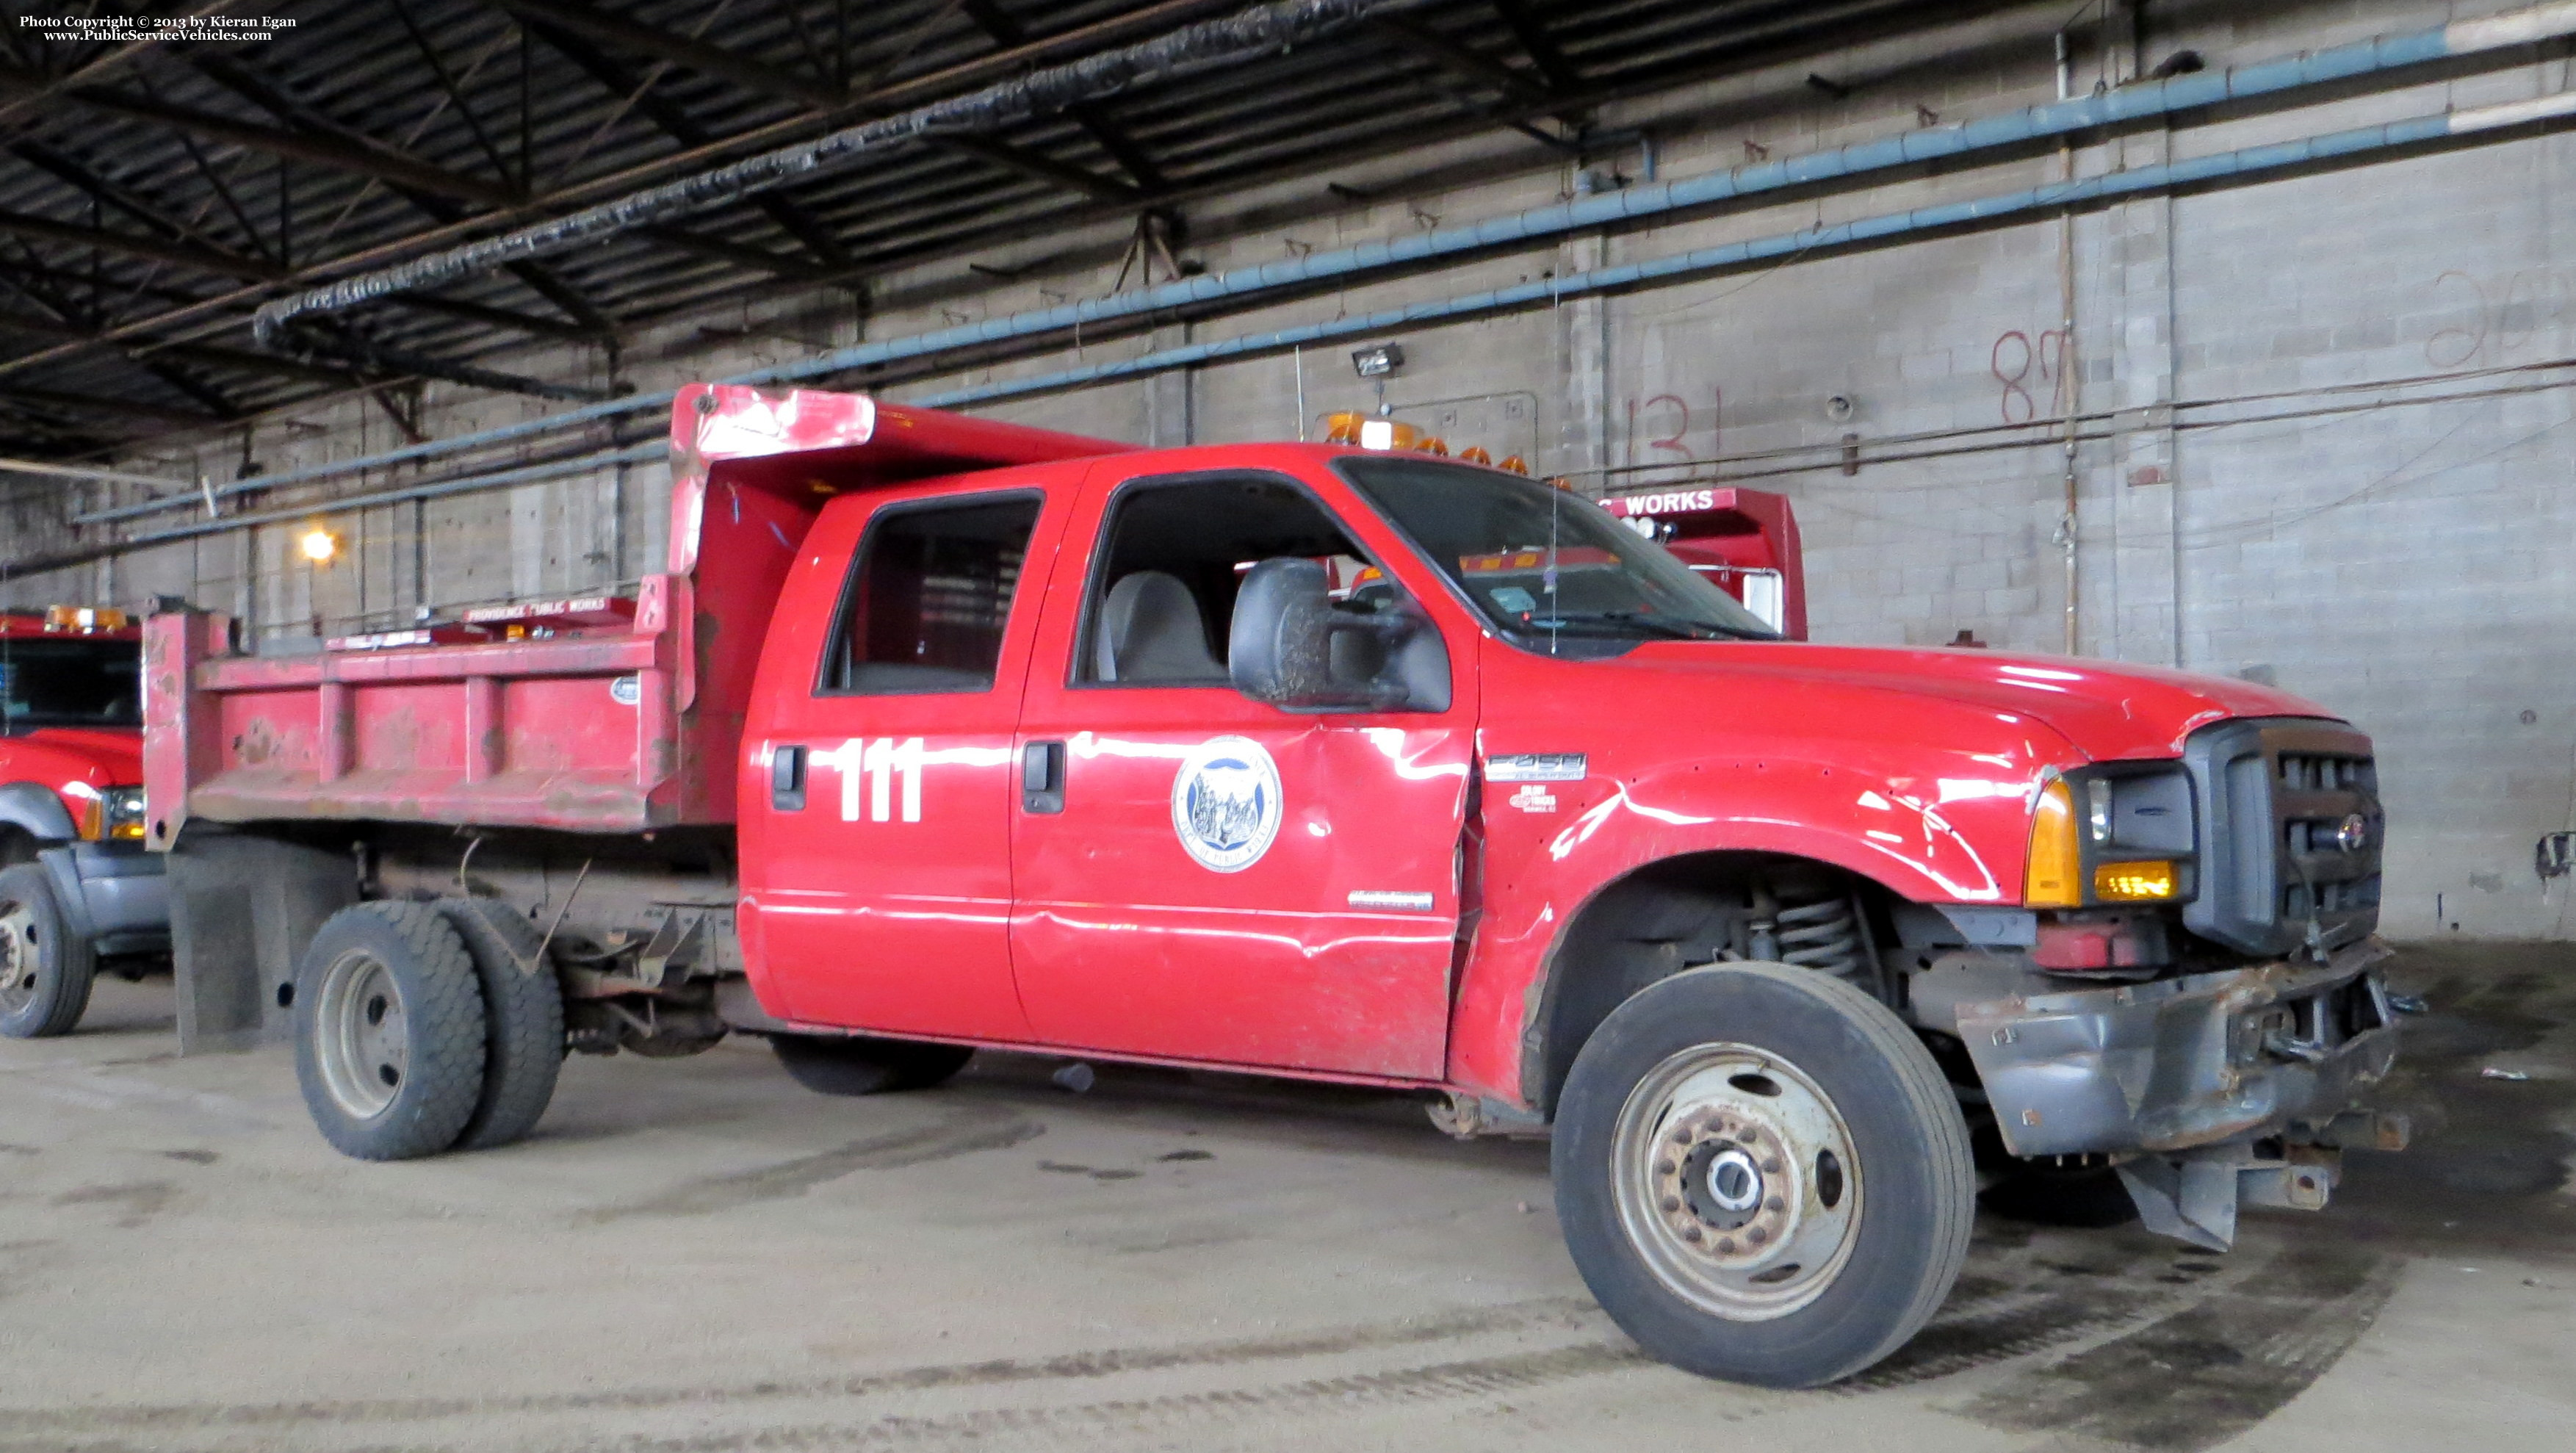 A photo  of Providence Highway Division
            Truck 111, a 2005-2007 Ford F-450 Crew Cab             taken by Kieran Egan